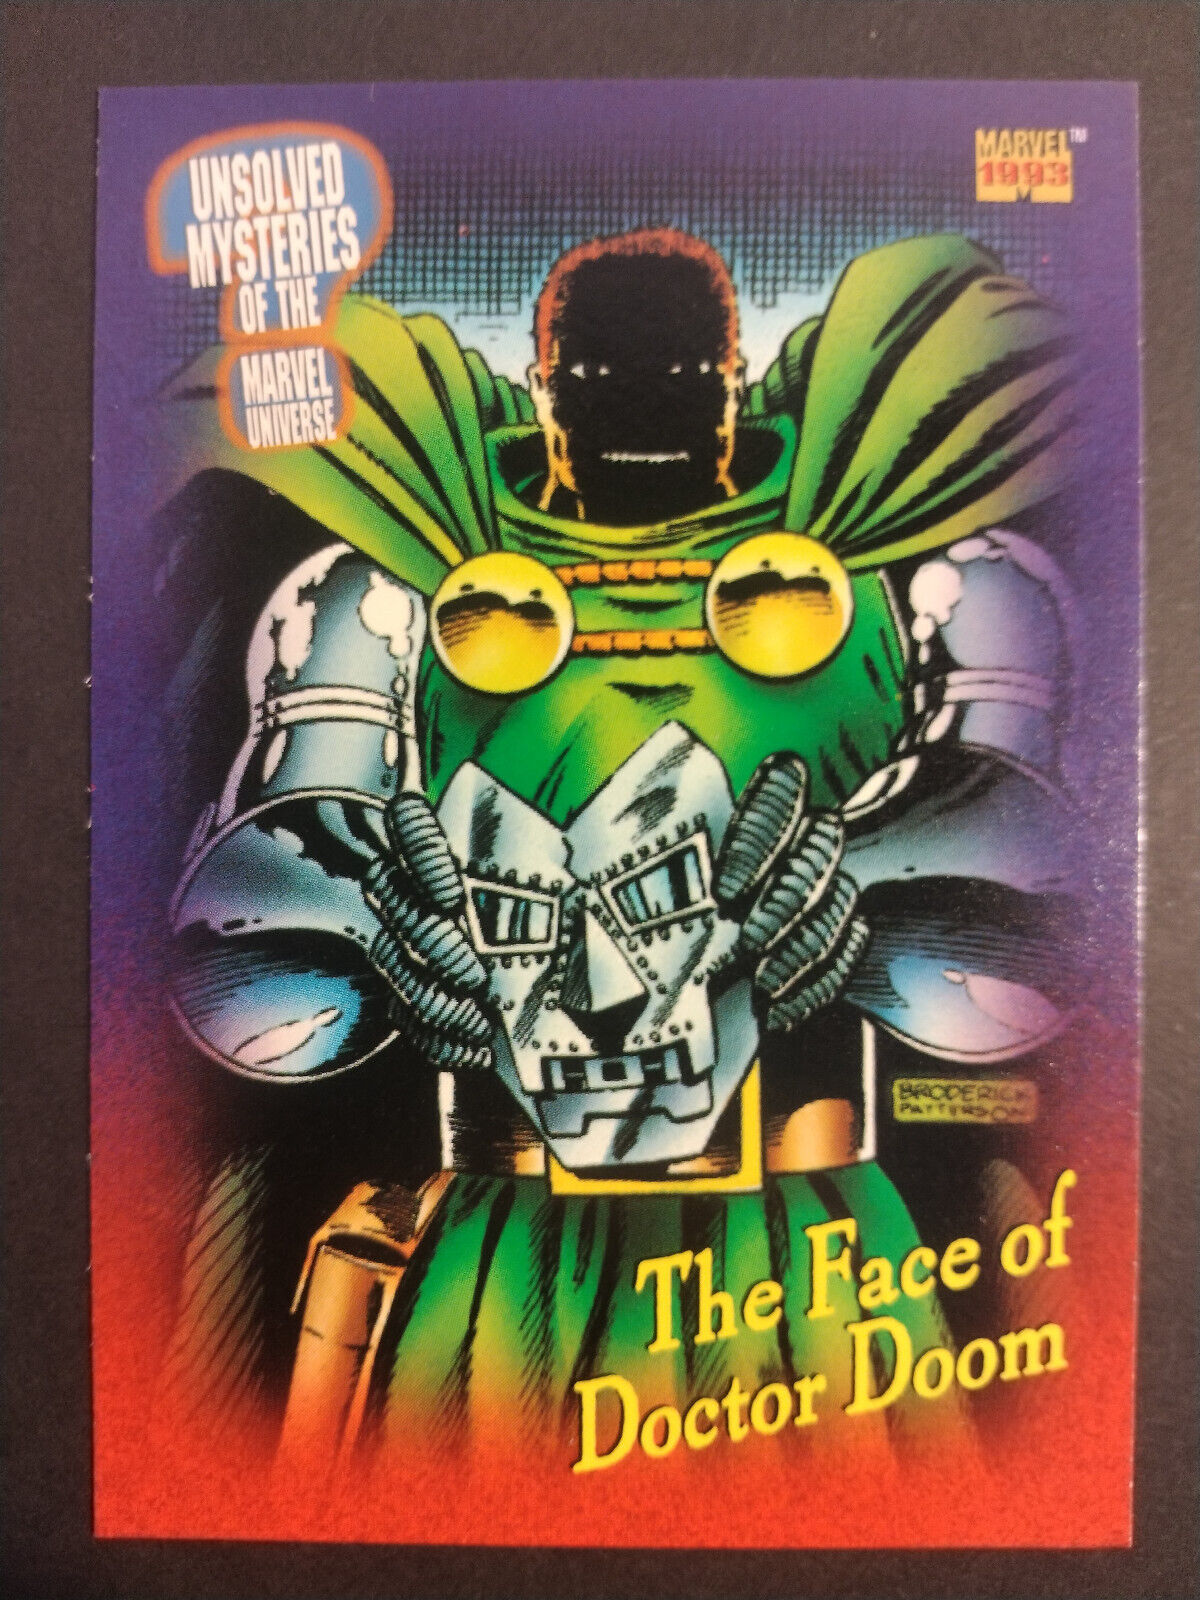 Primary image for Skybox Trading Card The Face of Doctor Doom #141 Marvel Unsolved Mystery 1993 LP